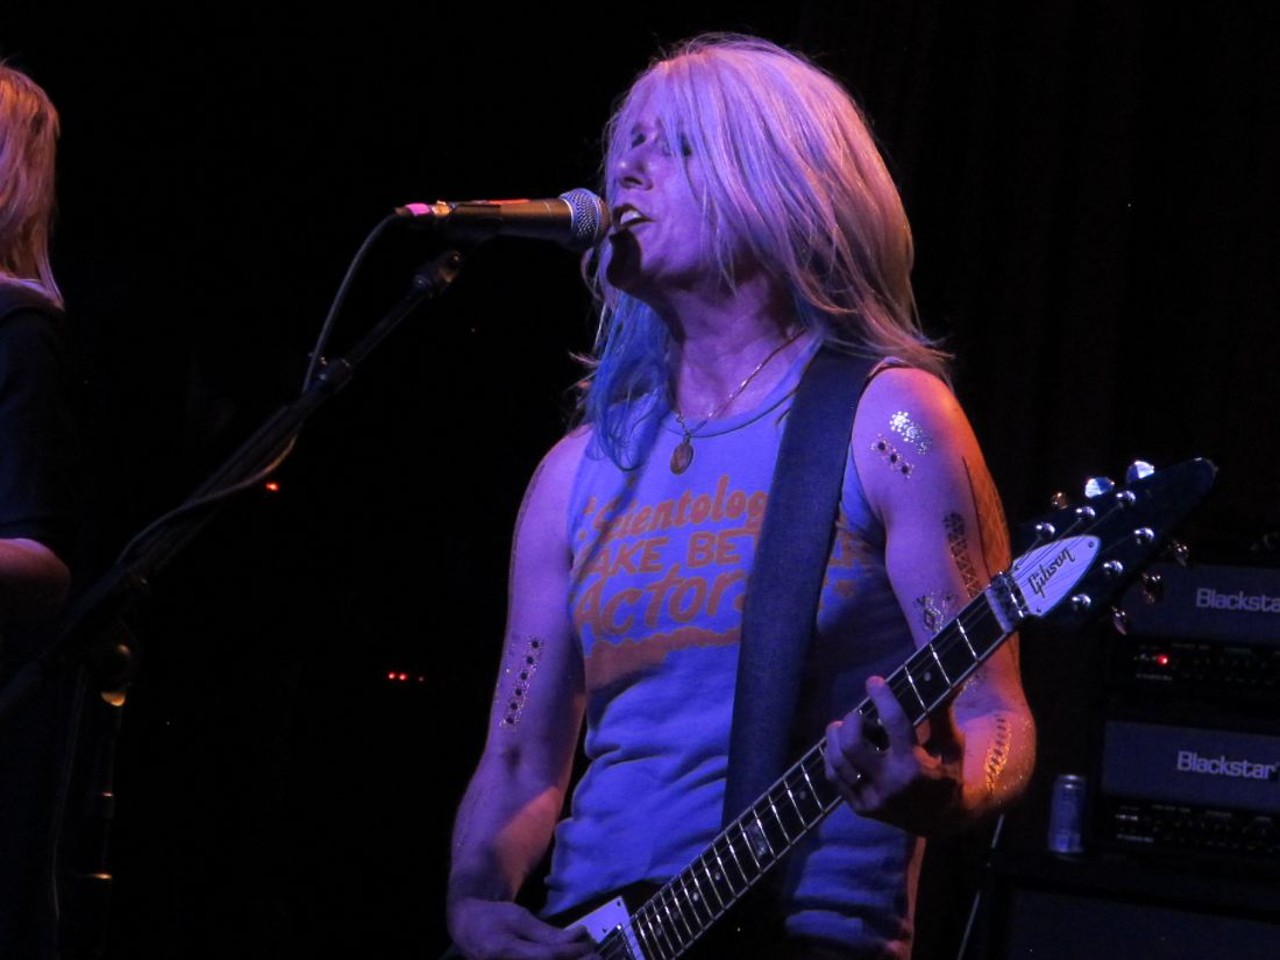 L7 and Death Valley Girls Performing at the Beachland Ballroom